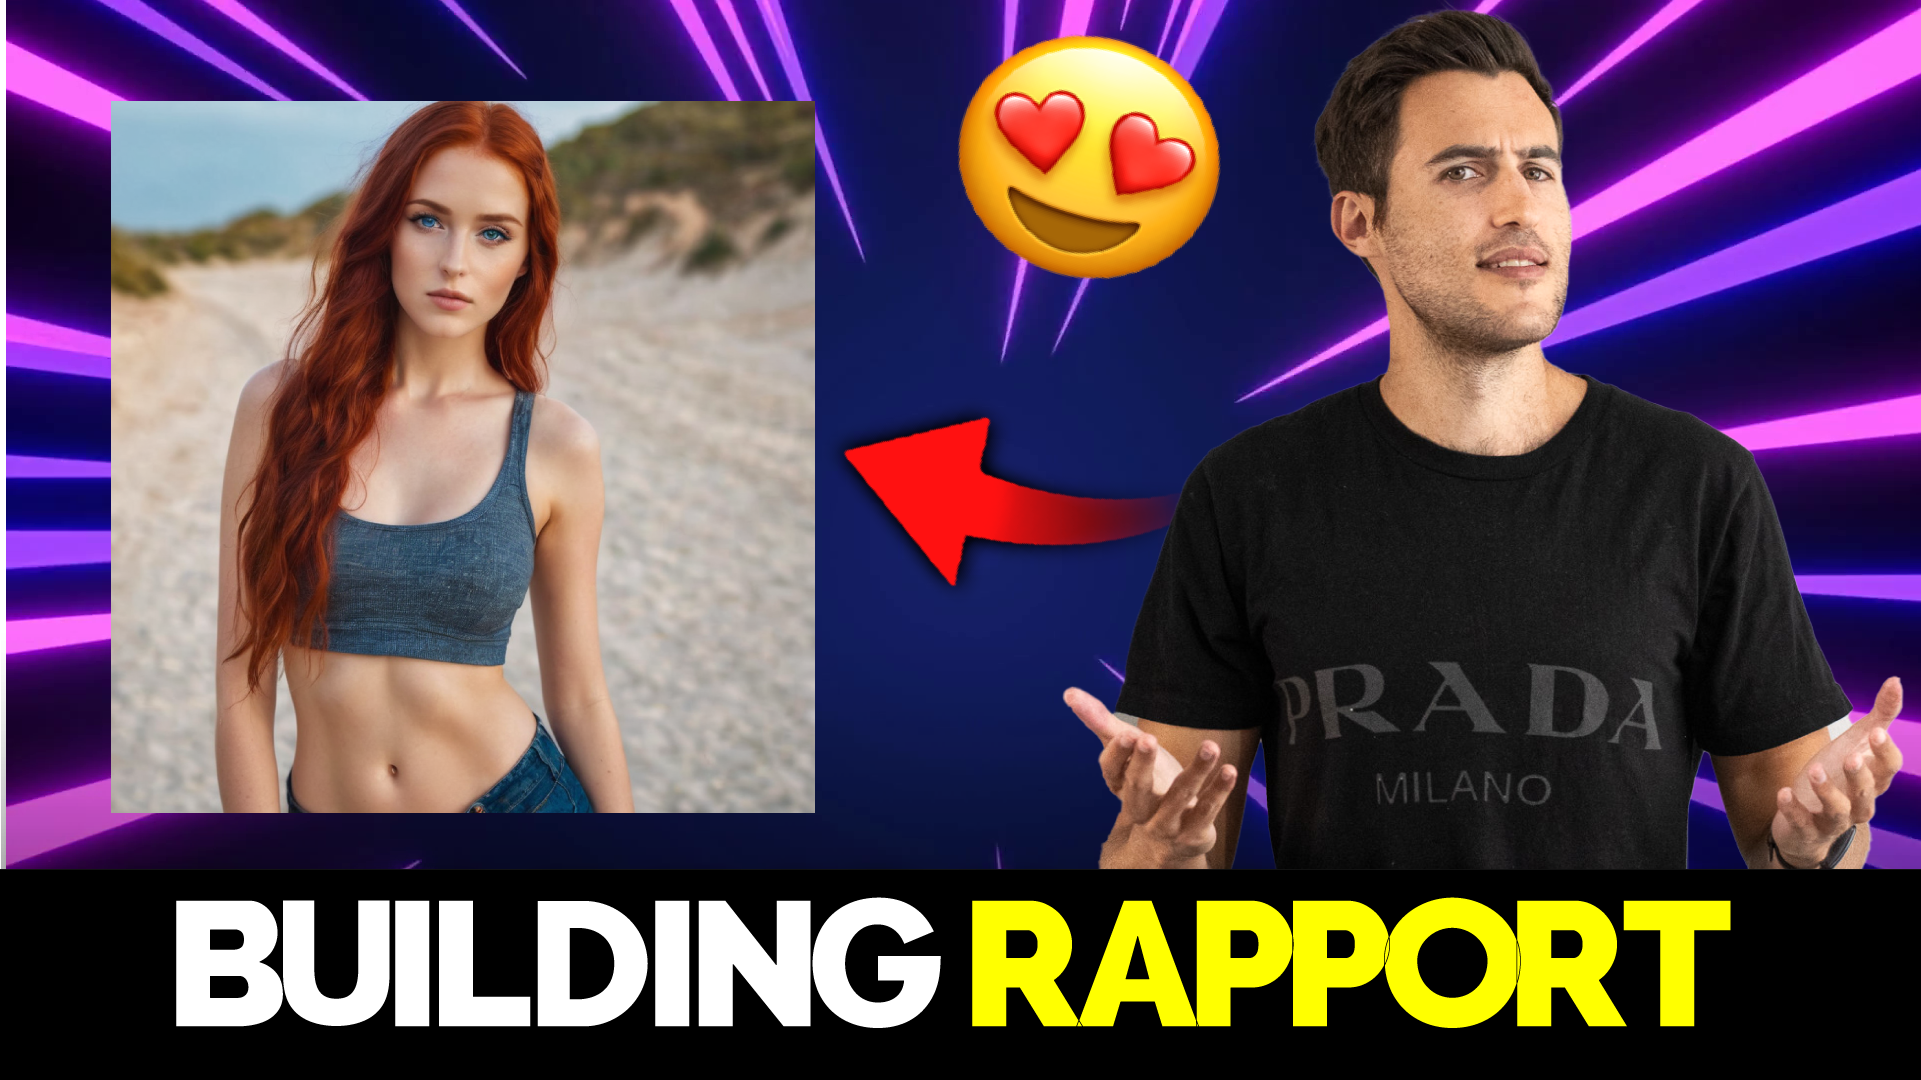 How To Build Rapport With Hot Girls During The Day (SIMPLE HACKS)